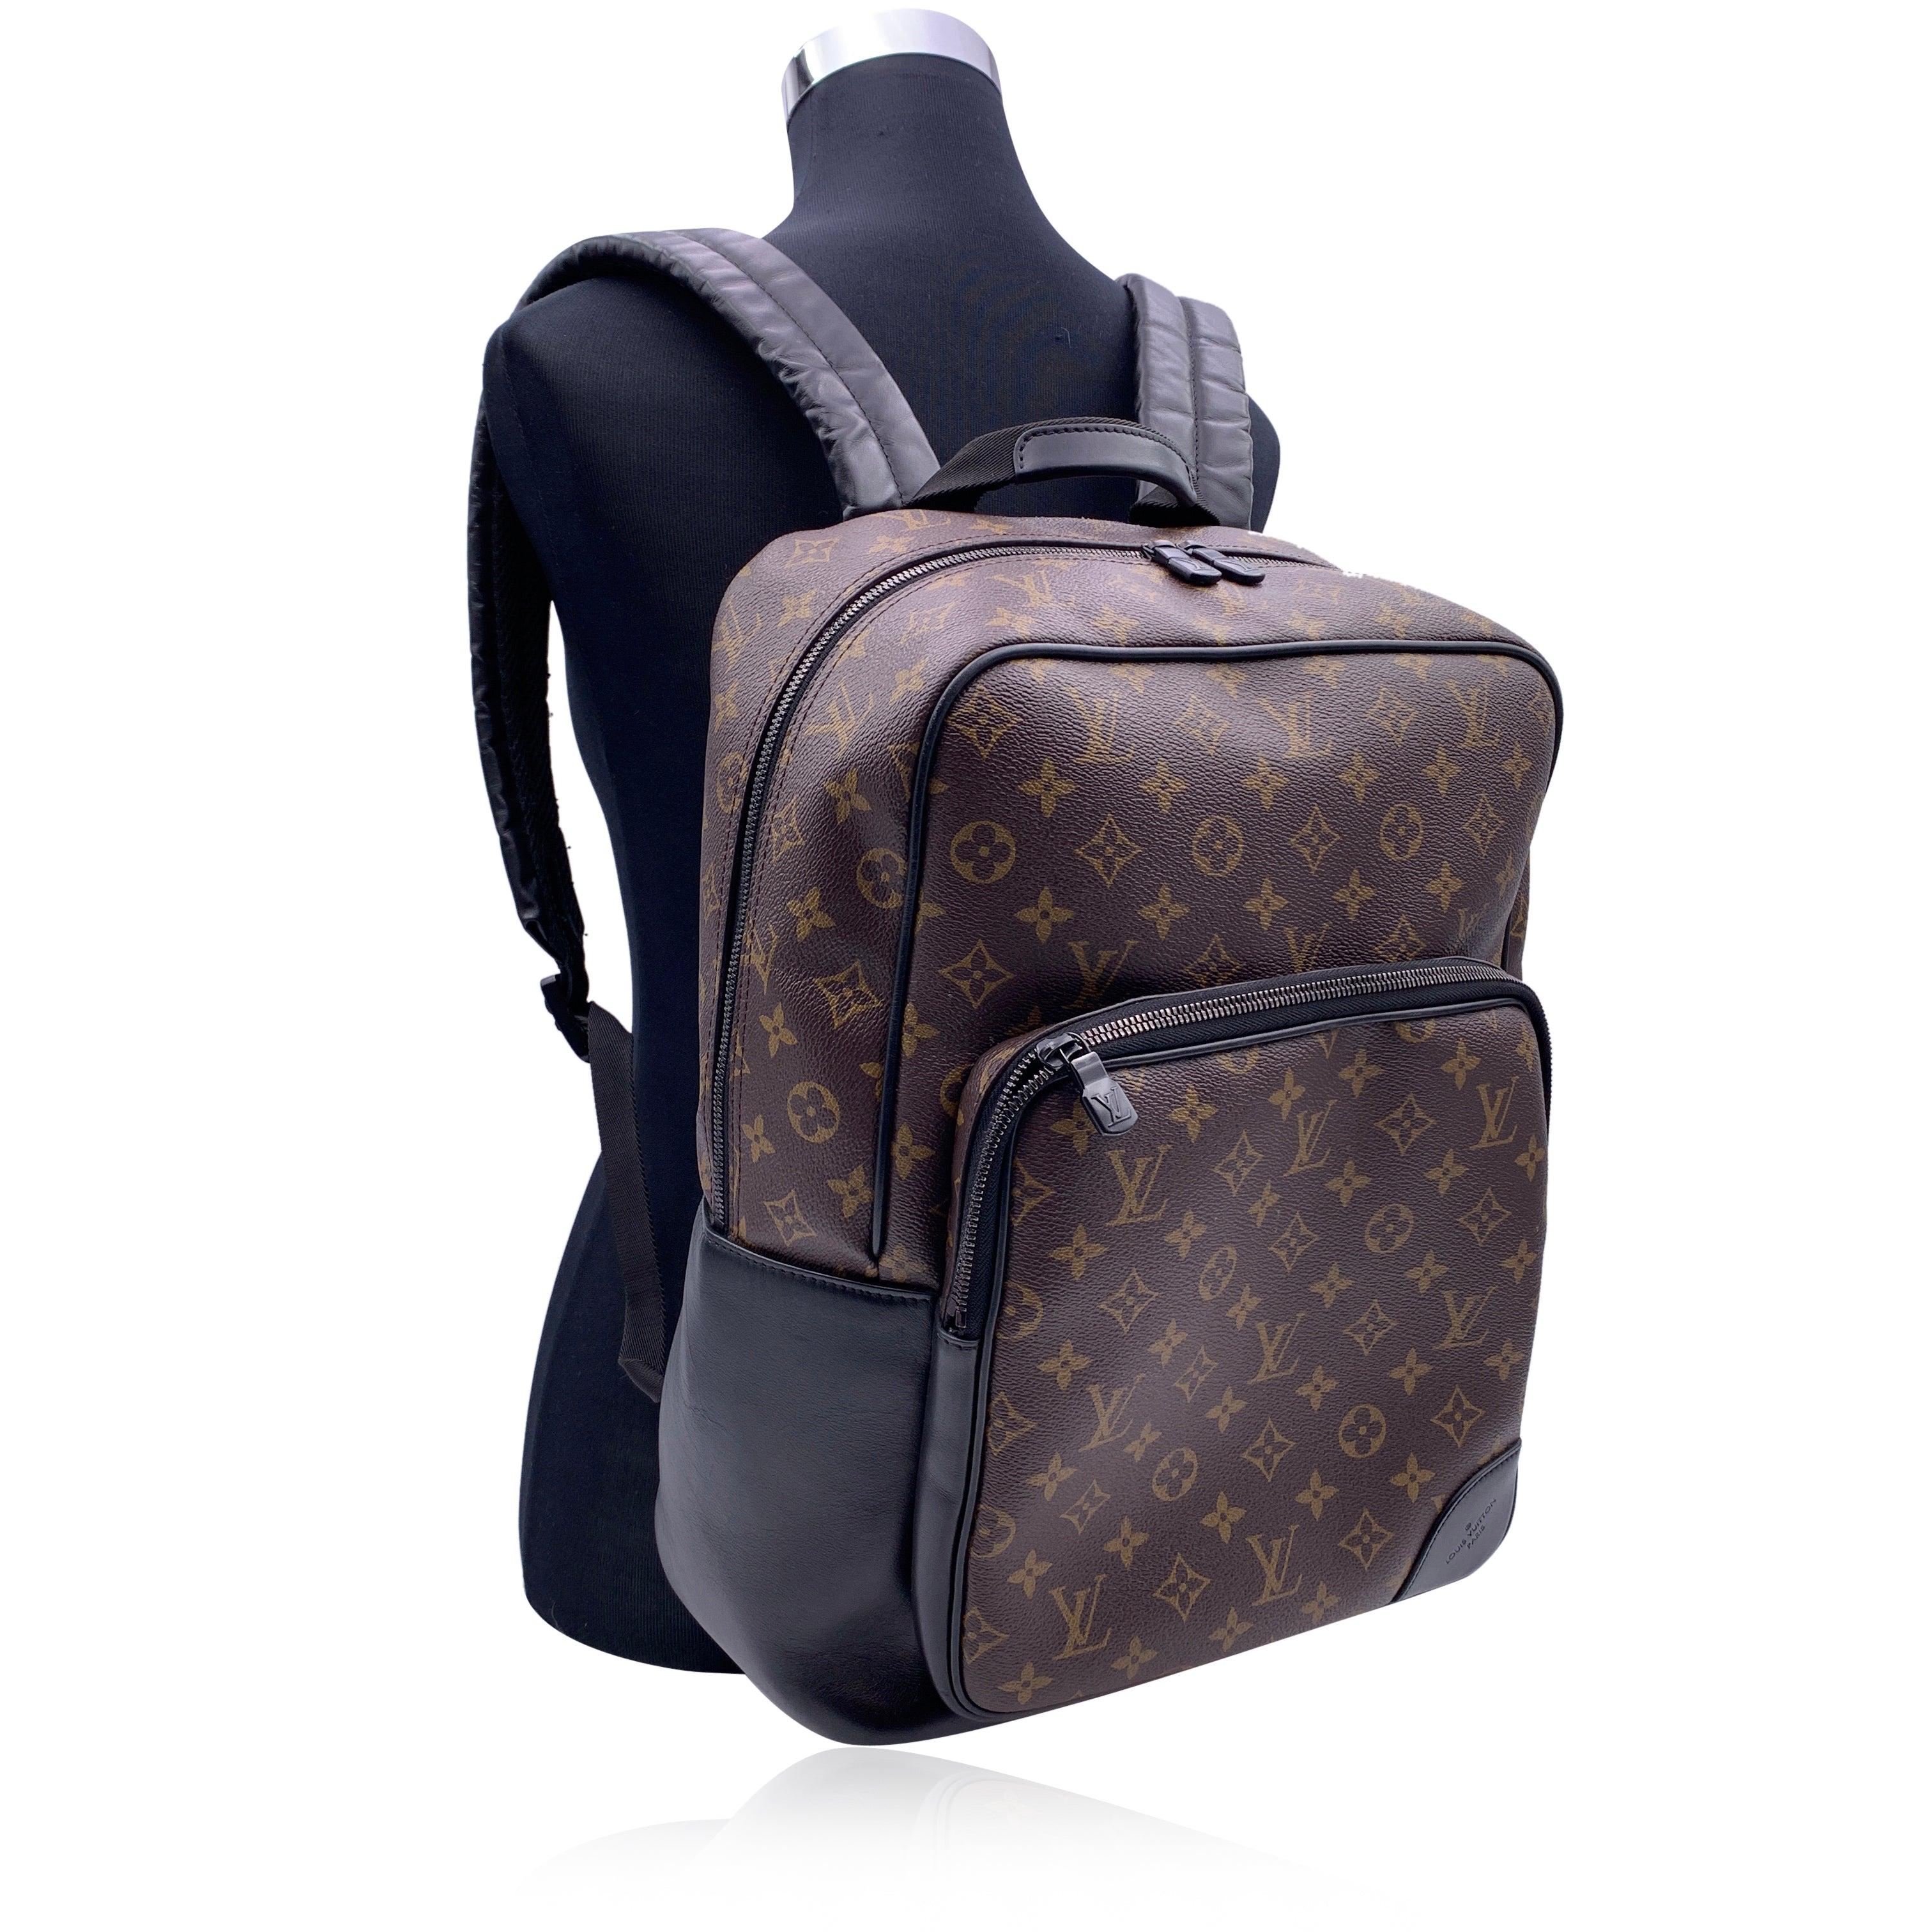 This beautiful Bag will come with a Certificate of Authenticity provided by Entrupy. The certificate will be provided at no further cost Louis Vuitton Monogram Macassar'Dean' Backpack bag, casual and sophisticated at the same time. Monogram canvas